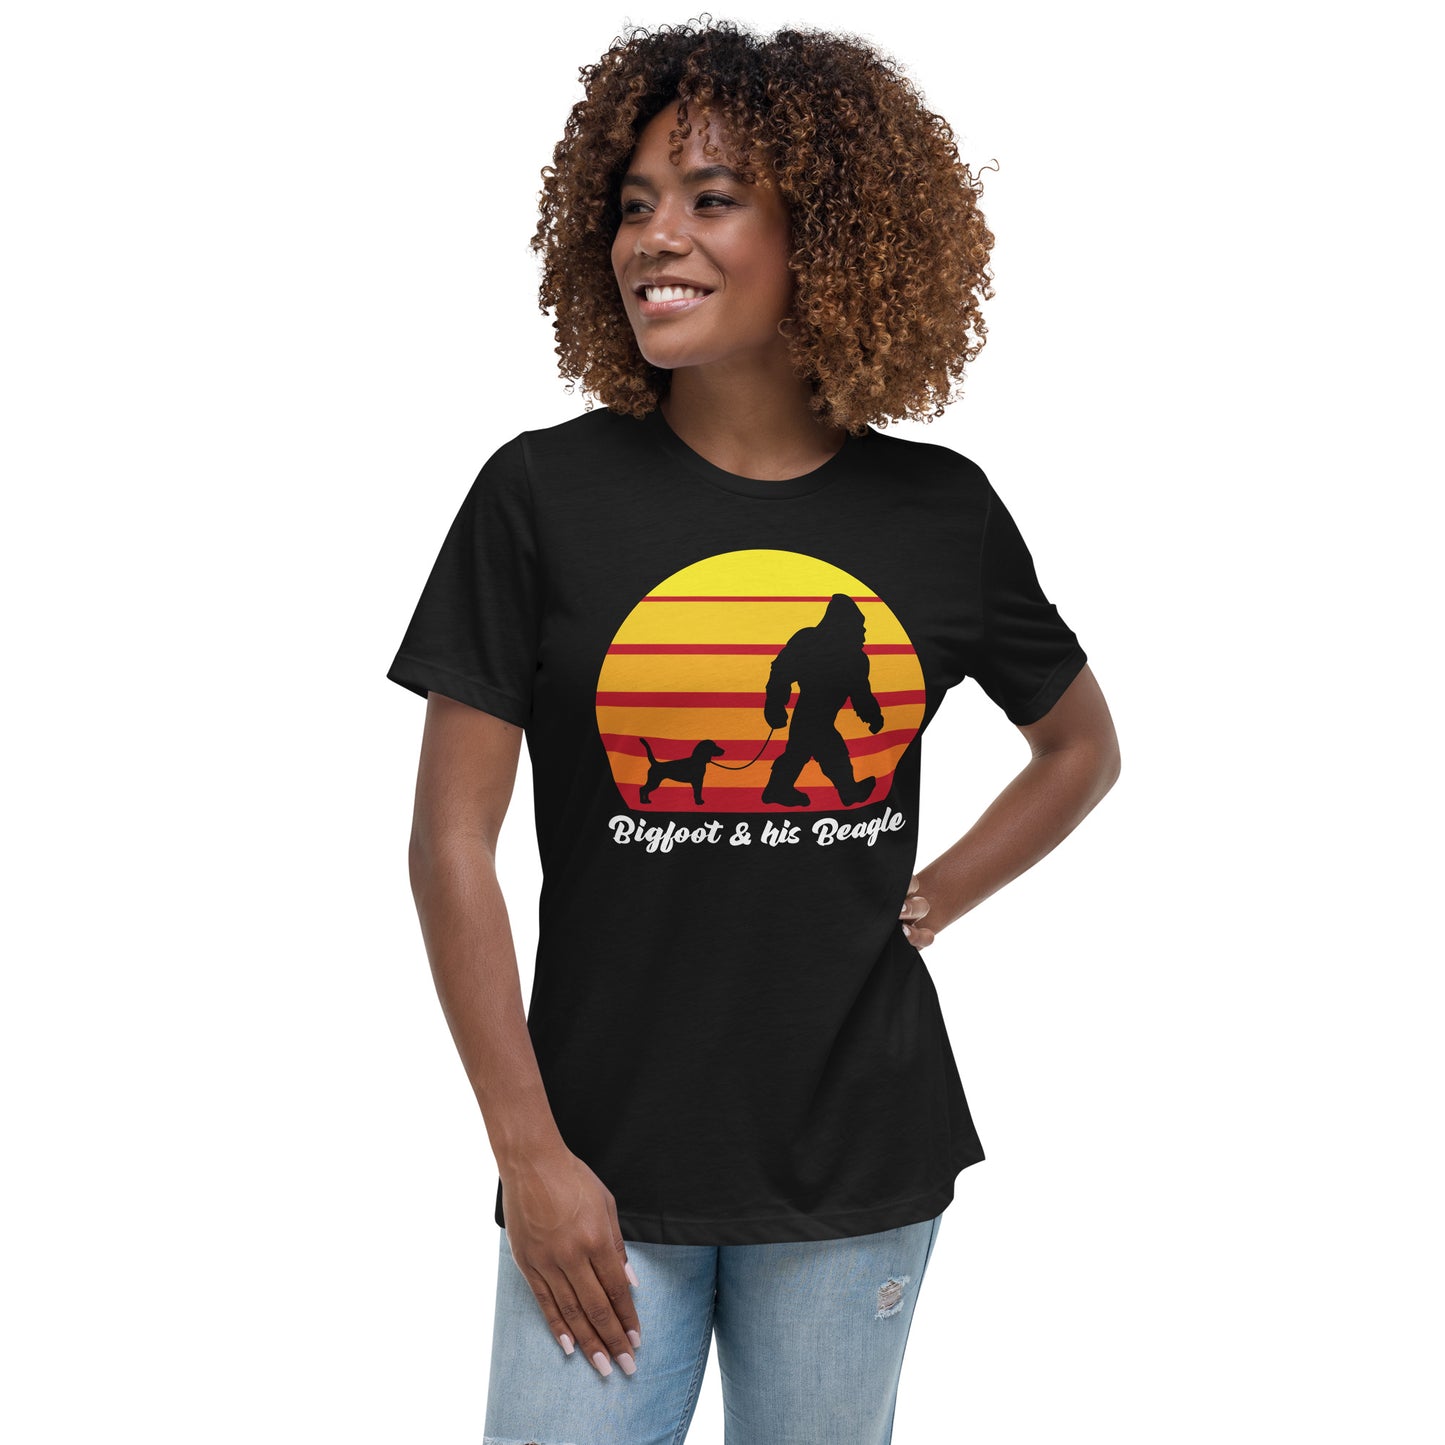 Big foot and his Beagle women’s black t-shirt by Dog Artistry.